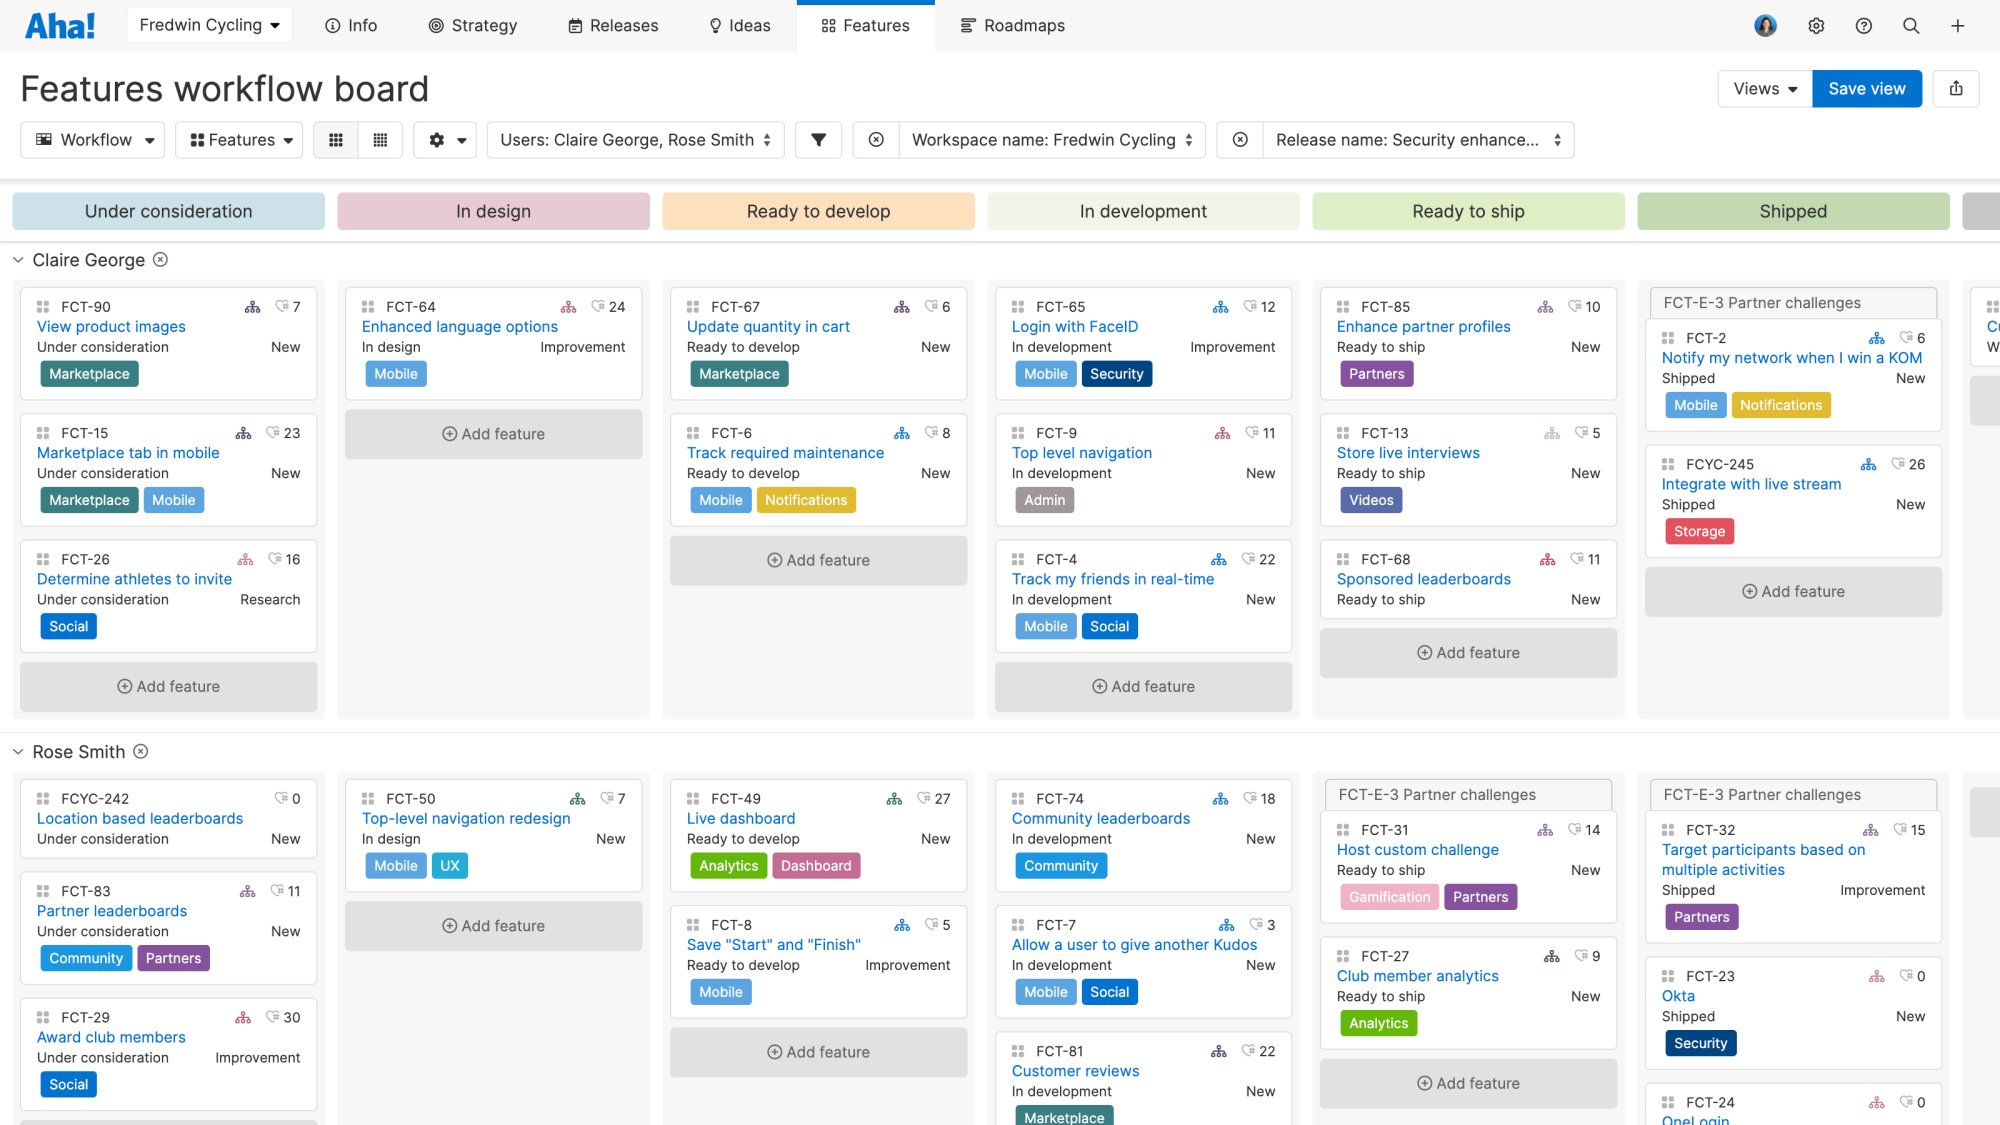 The features workflow board in Aha!